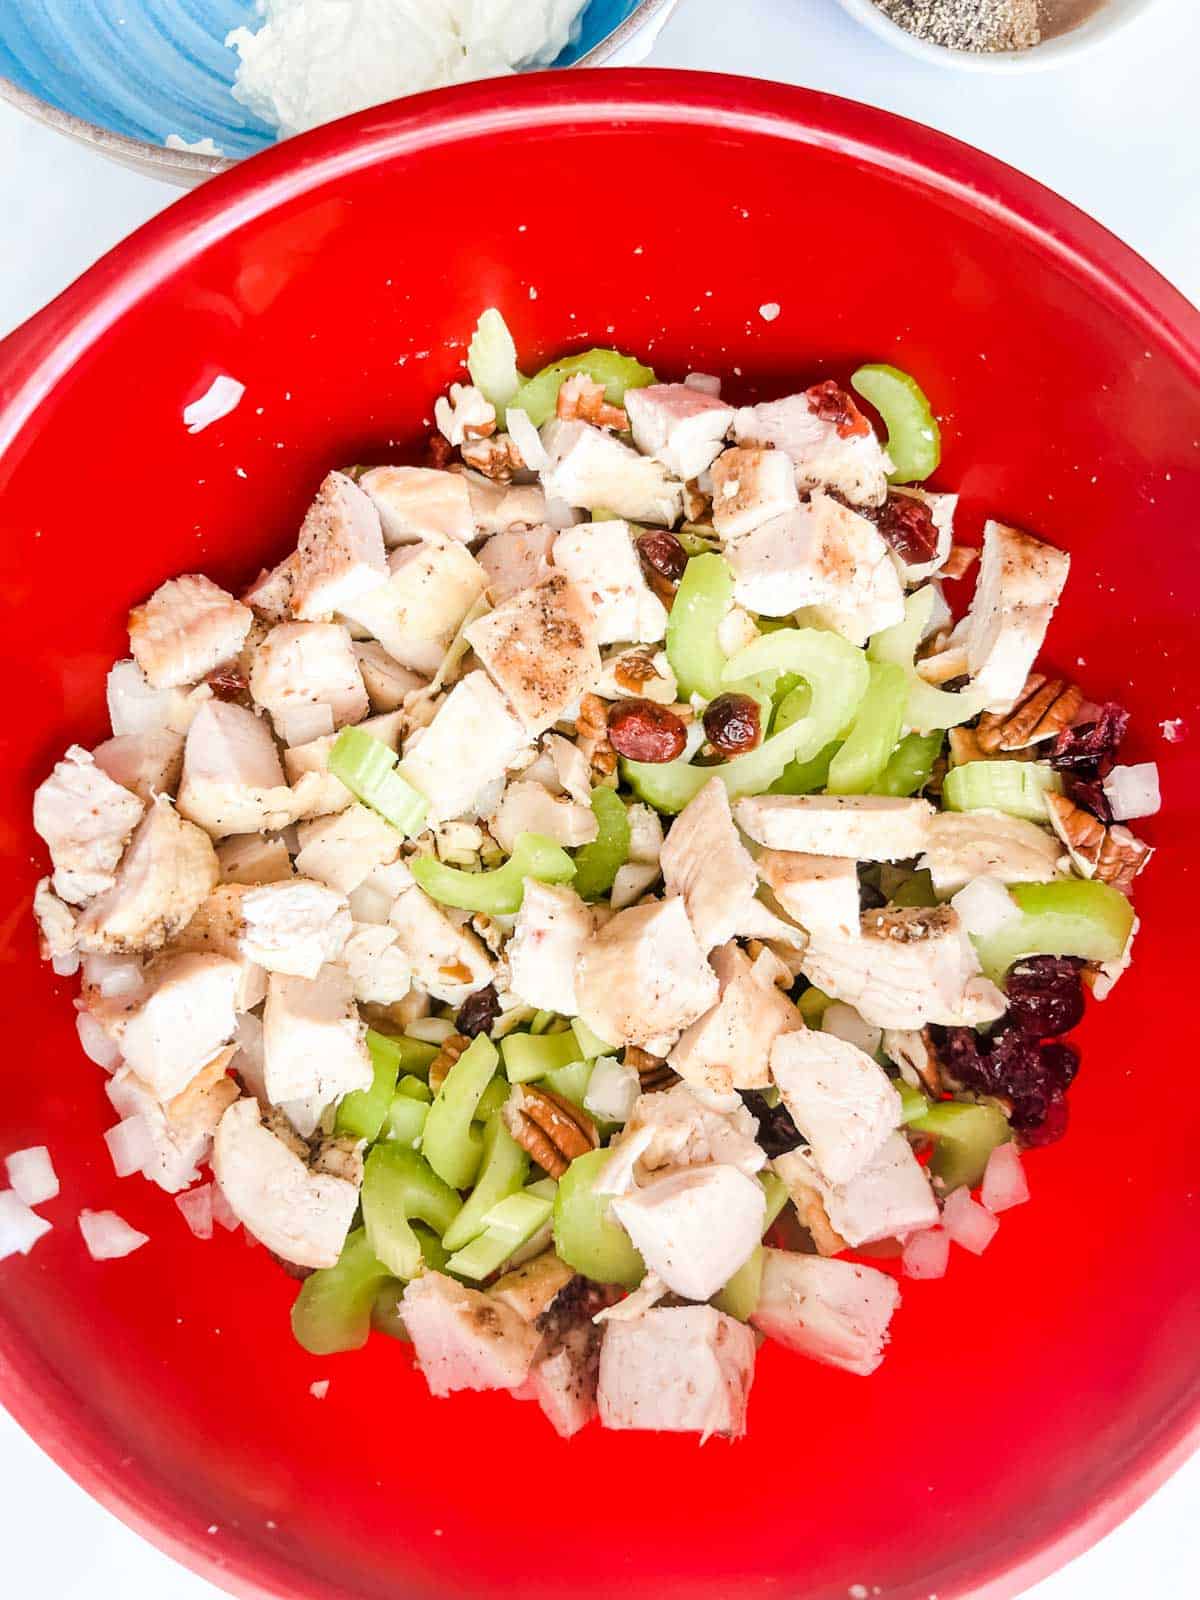 A large red bowl with chopped chicken, celery, cranberries, onion, and pecans.